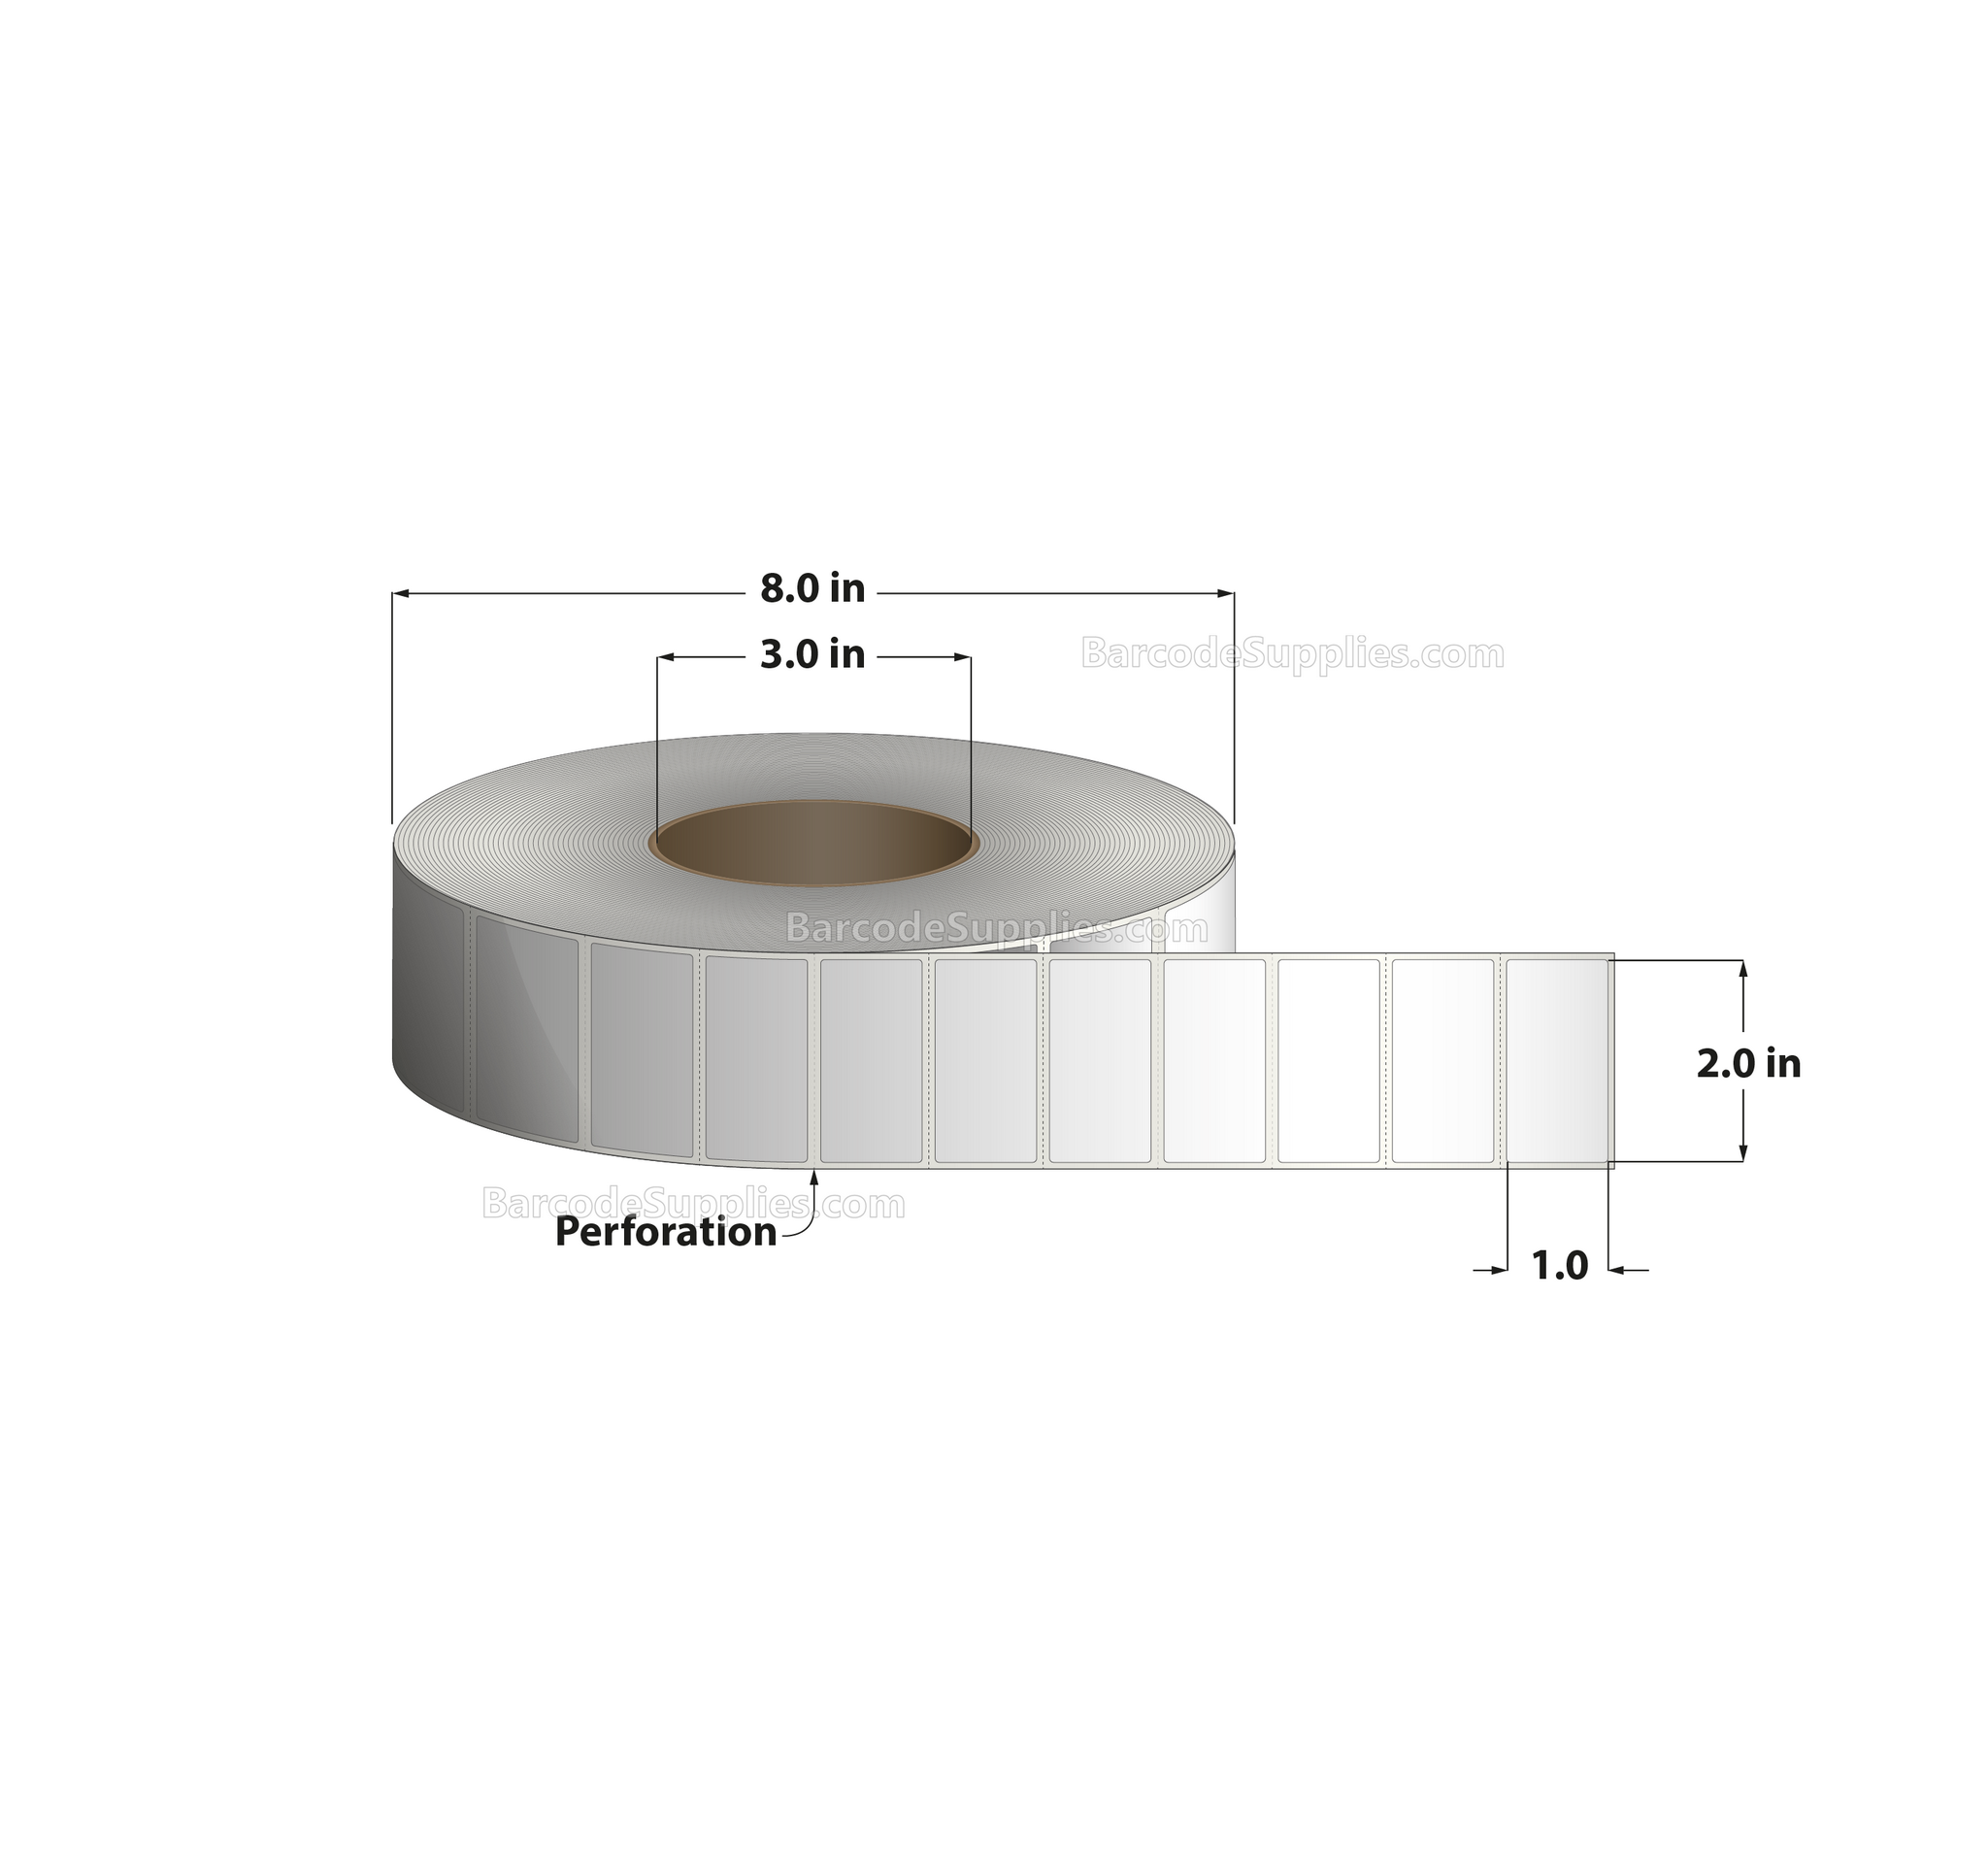 2 x 1 Direct Thermal White Labels With Acrylic Adhesive - Perforated - 5500 Labels Per Roll - Carton Of 8 Rolls - 44000 Labels Total - MPN: RDS-2-1-5500-3 - BarcodeSource, Inc.